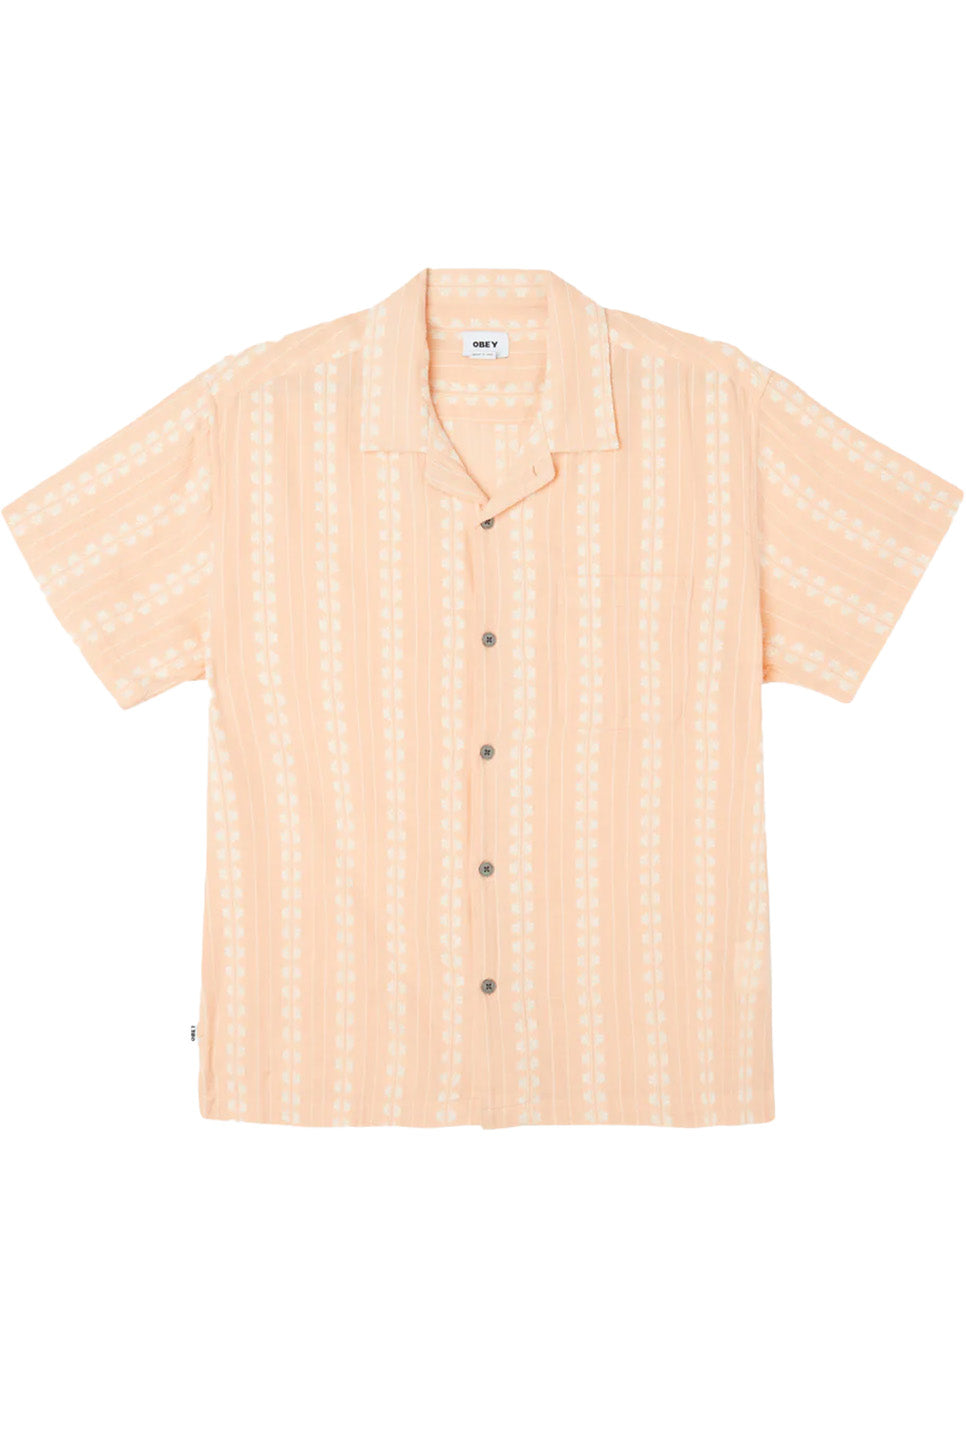 Obey - Harmony Woven - Peach Parfait Multi - Front